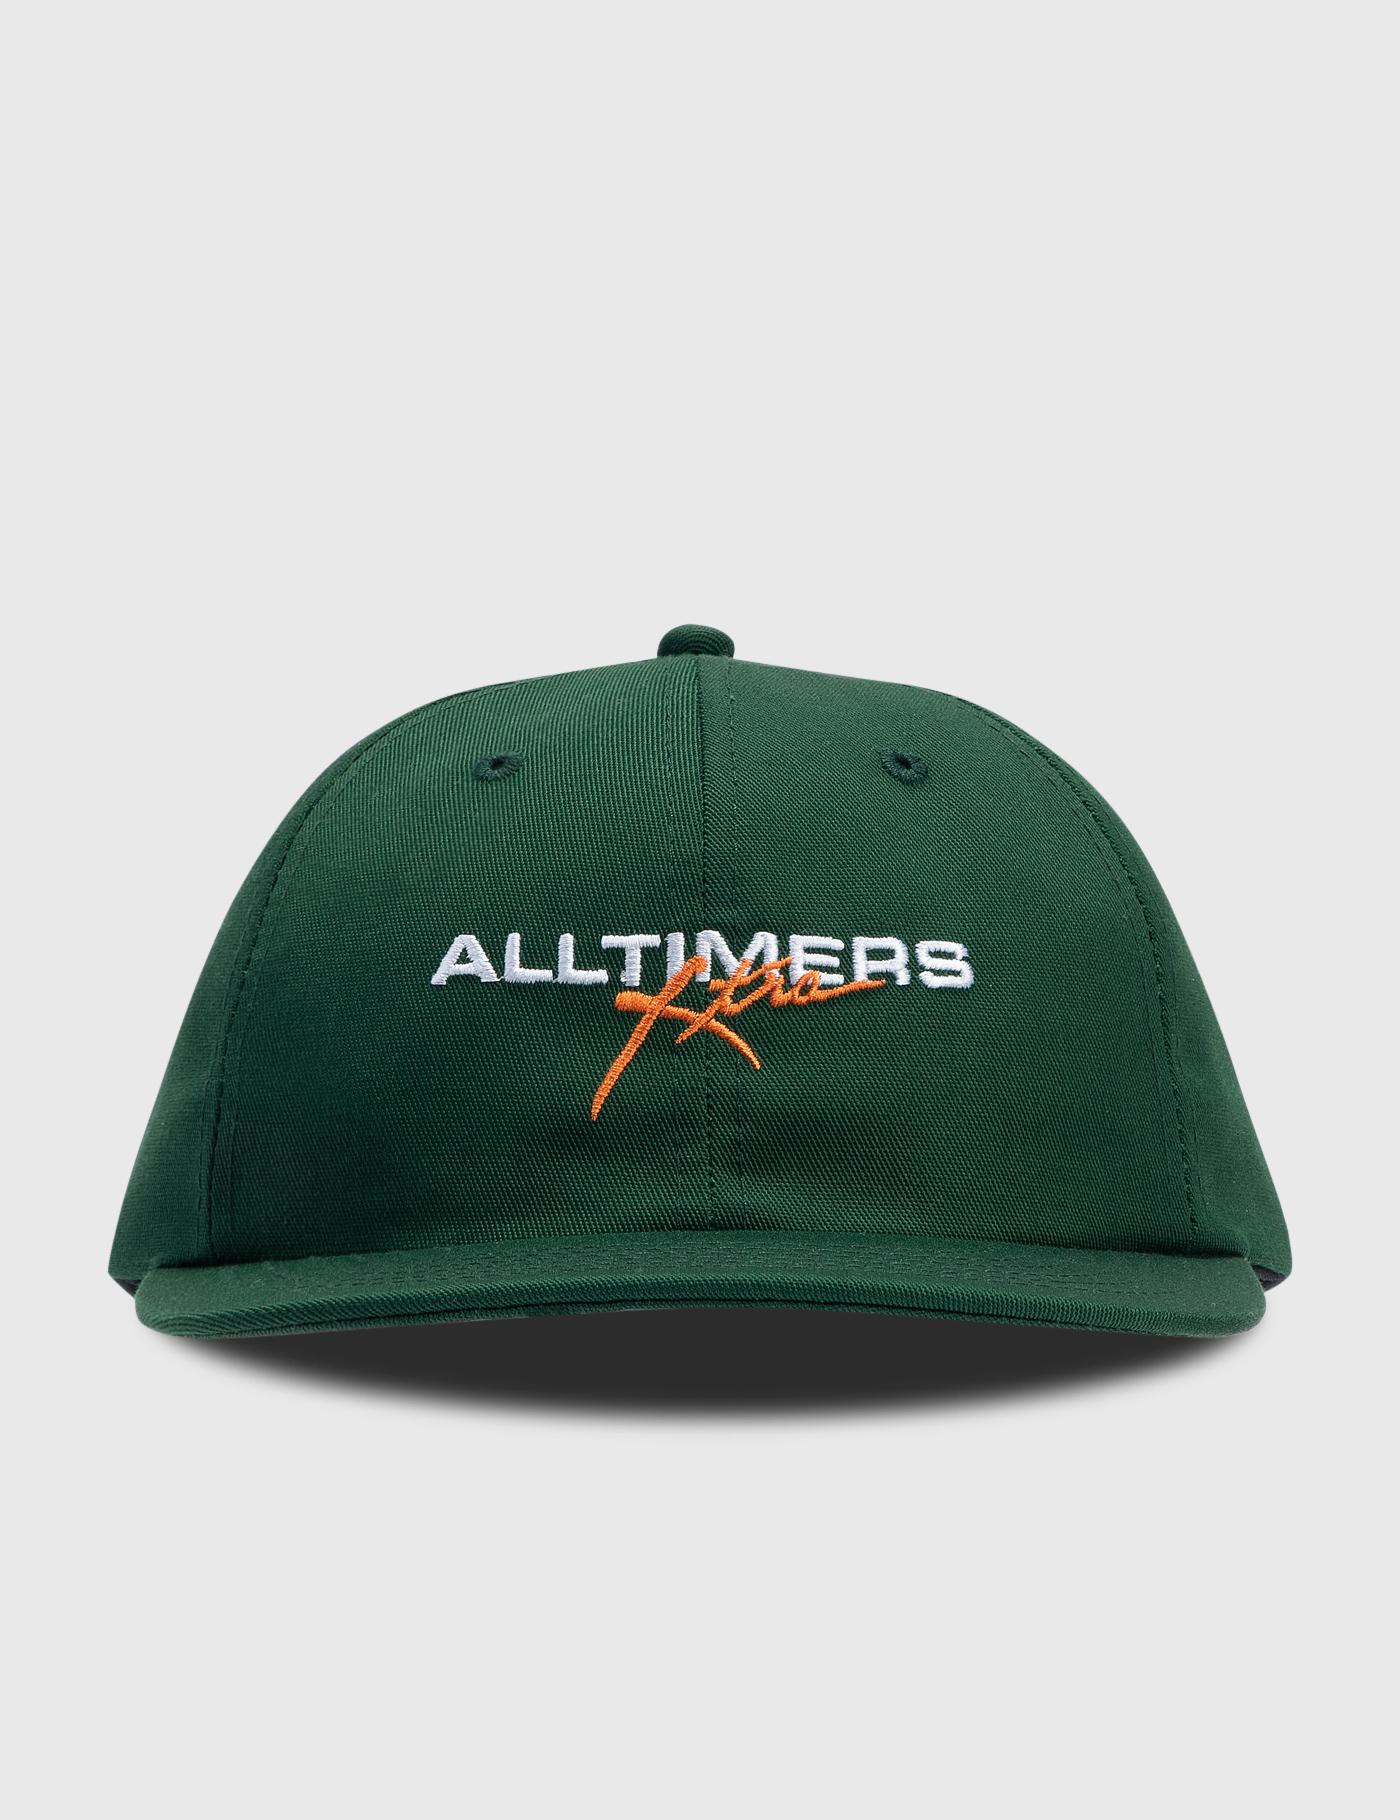 Extra Cap by ALLTIMERS